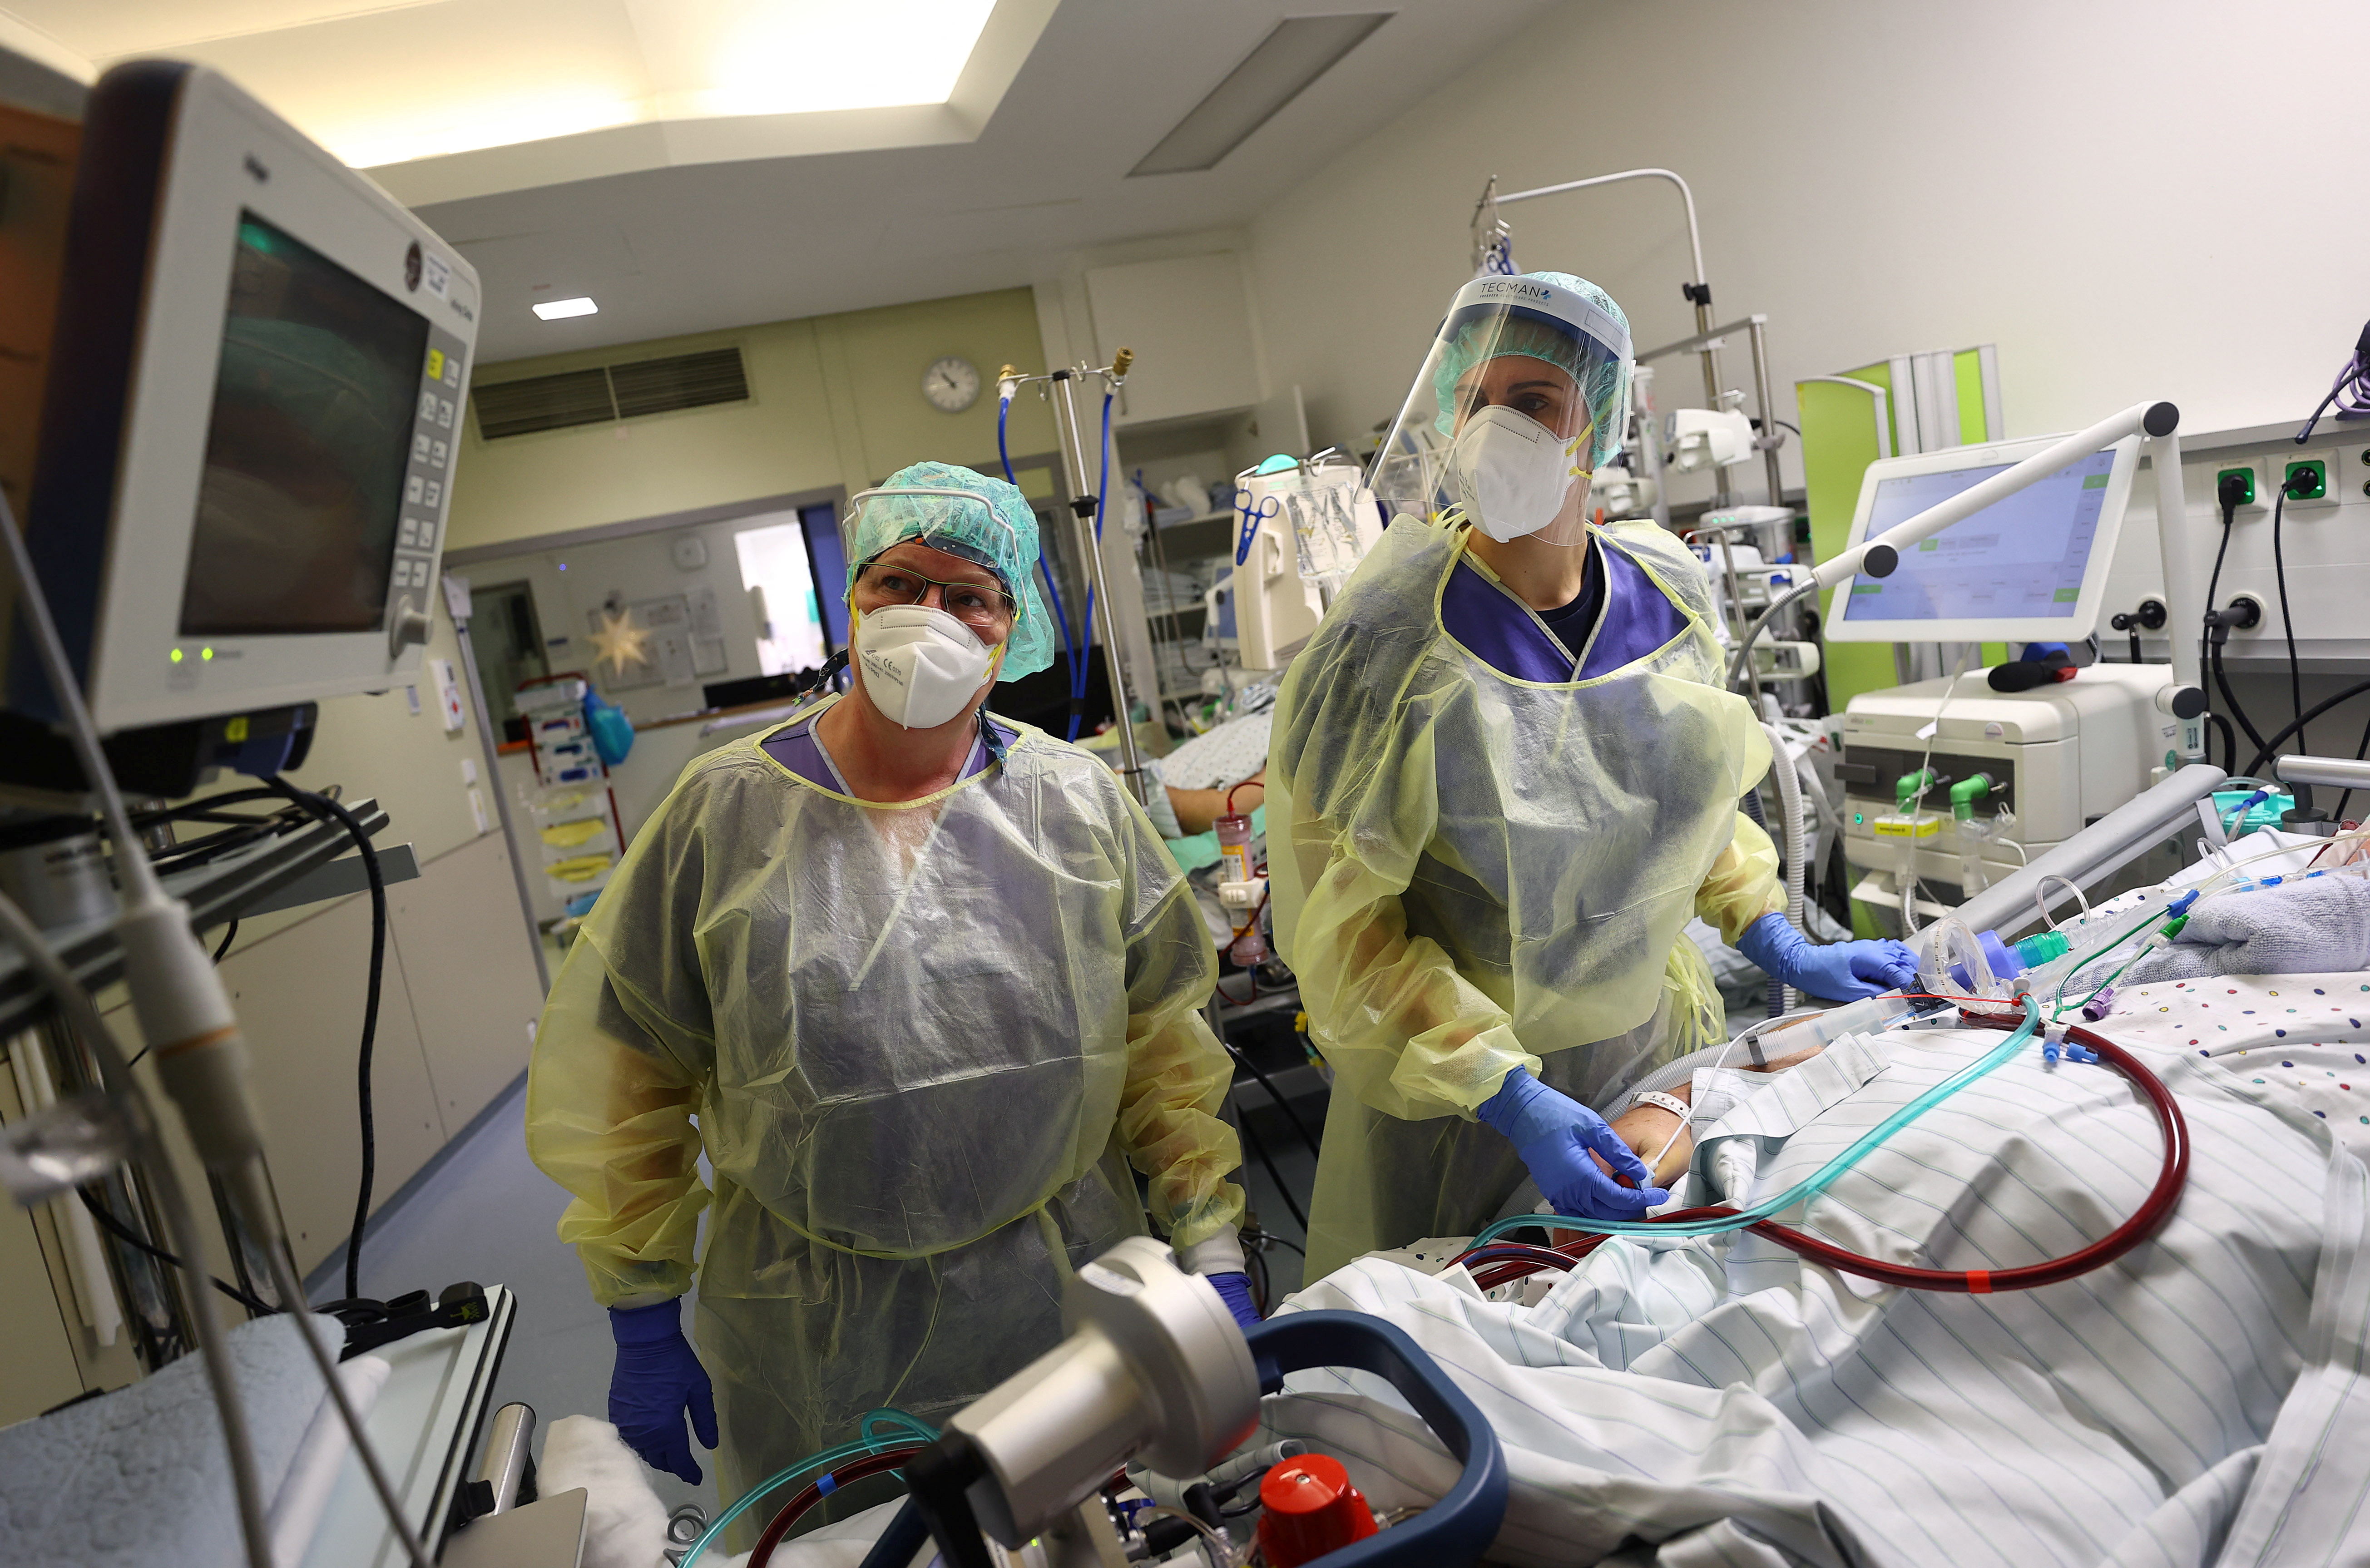 Medical staff adjust the ECMO (extracorporeal membrane oxygenation) life support unit before they transfer a patient for a CT examination at the coronavirus disease (COVID-19) Intensive Care Unit (ICU) of the 